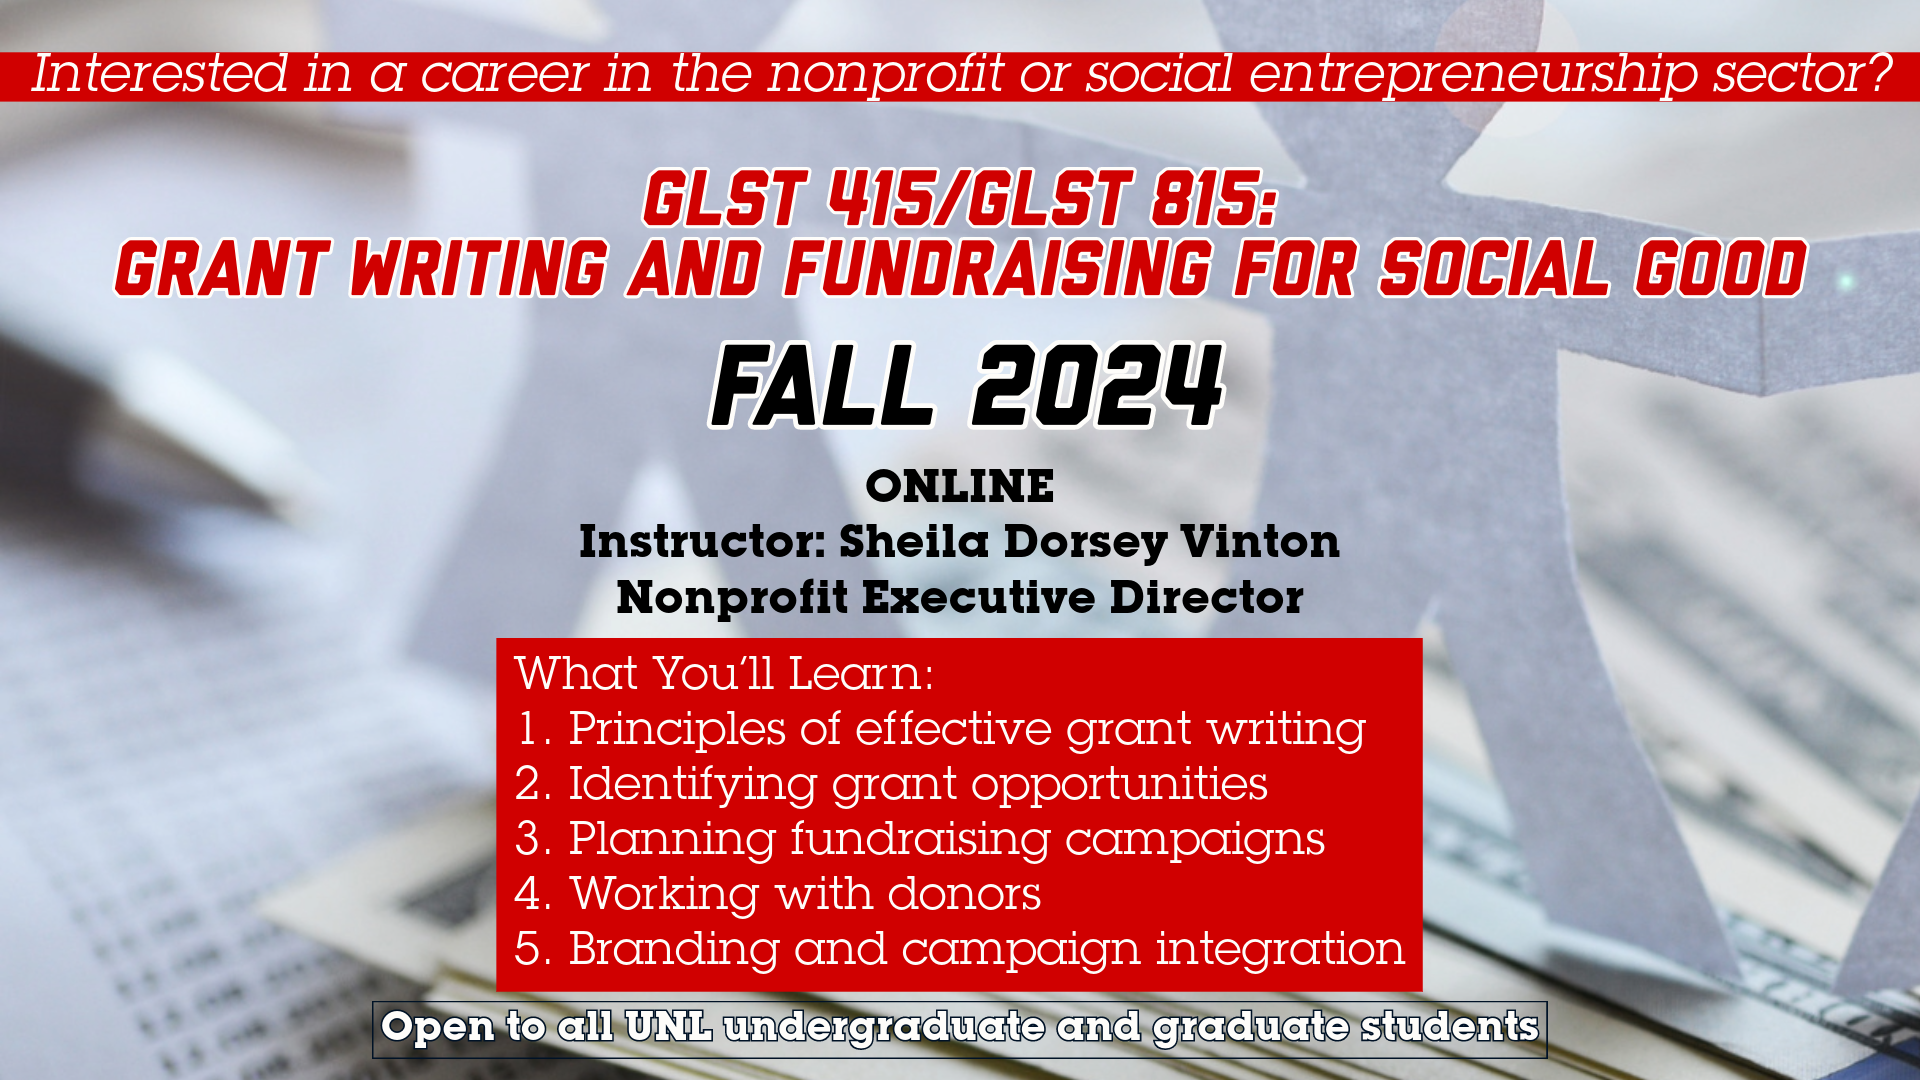 Learn about Grant Writing and Fundraising 